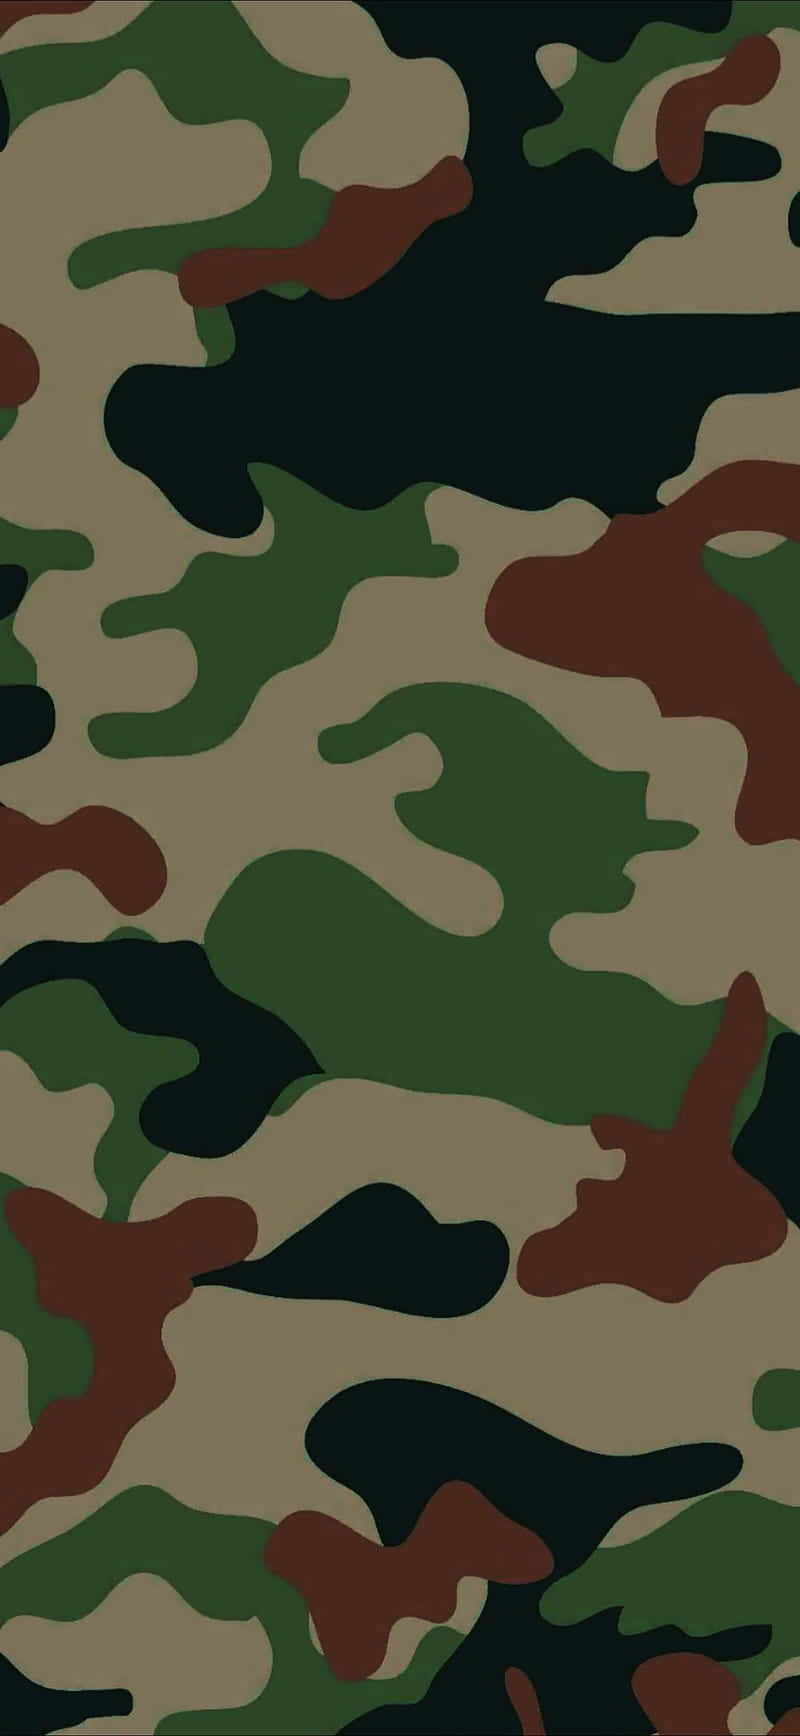 A Camouflage Pattern With A Brown And Green Color Wallpaper